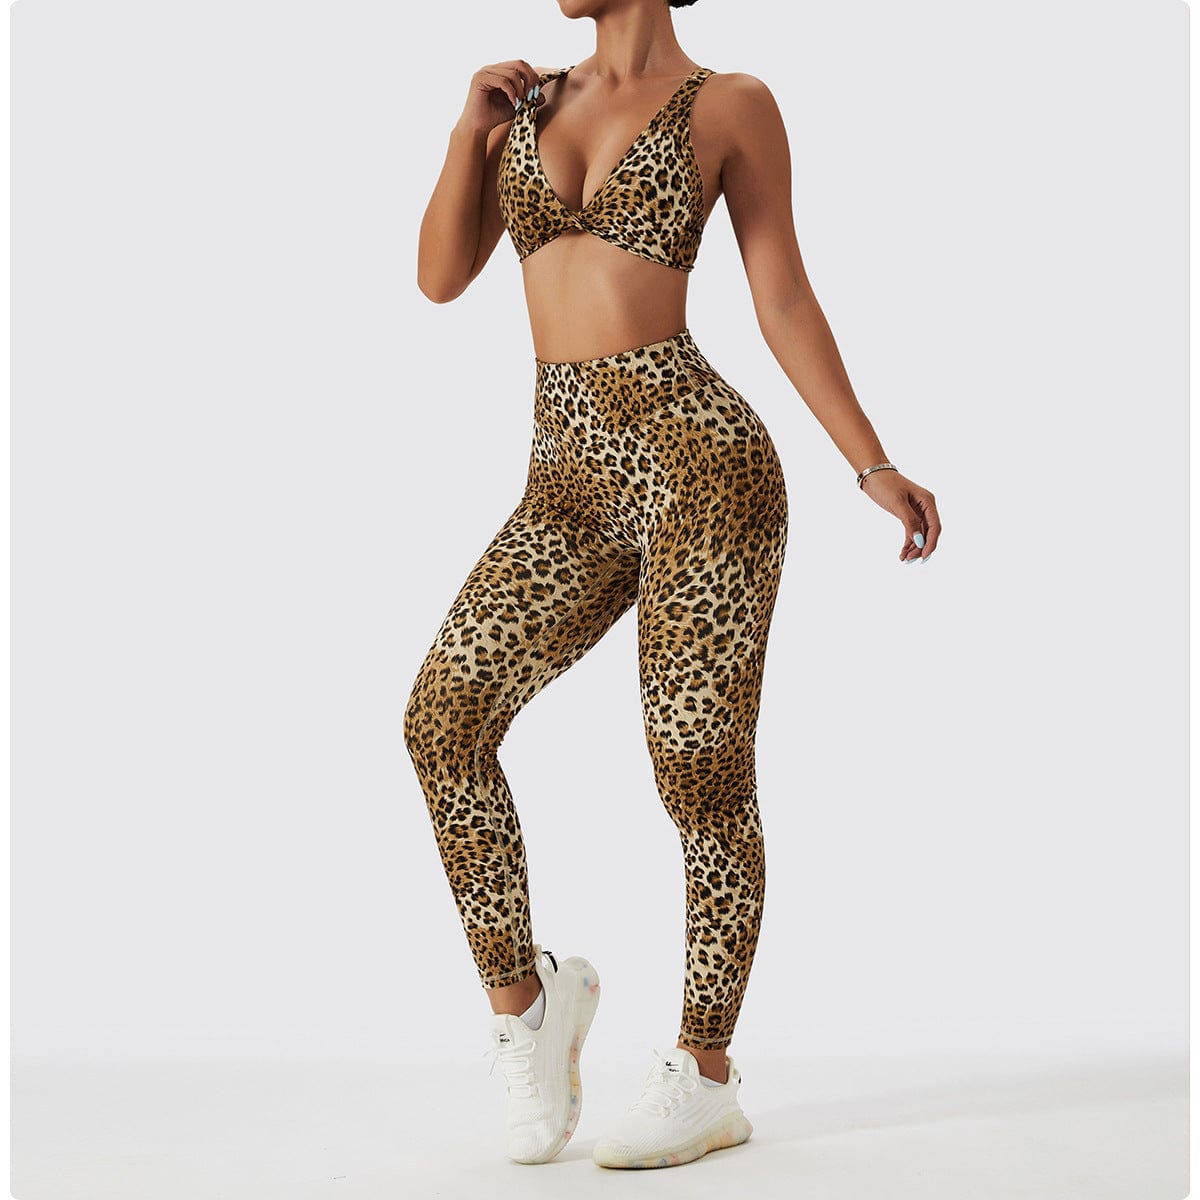 Juicy Couture Workout Athletic Wear Leopard Print Cropped Leggings Small